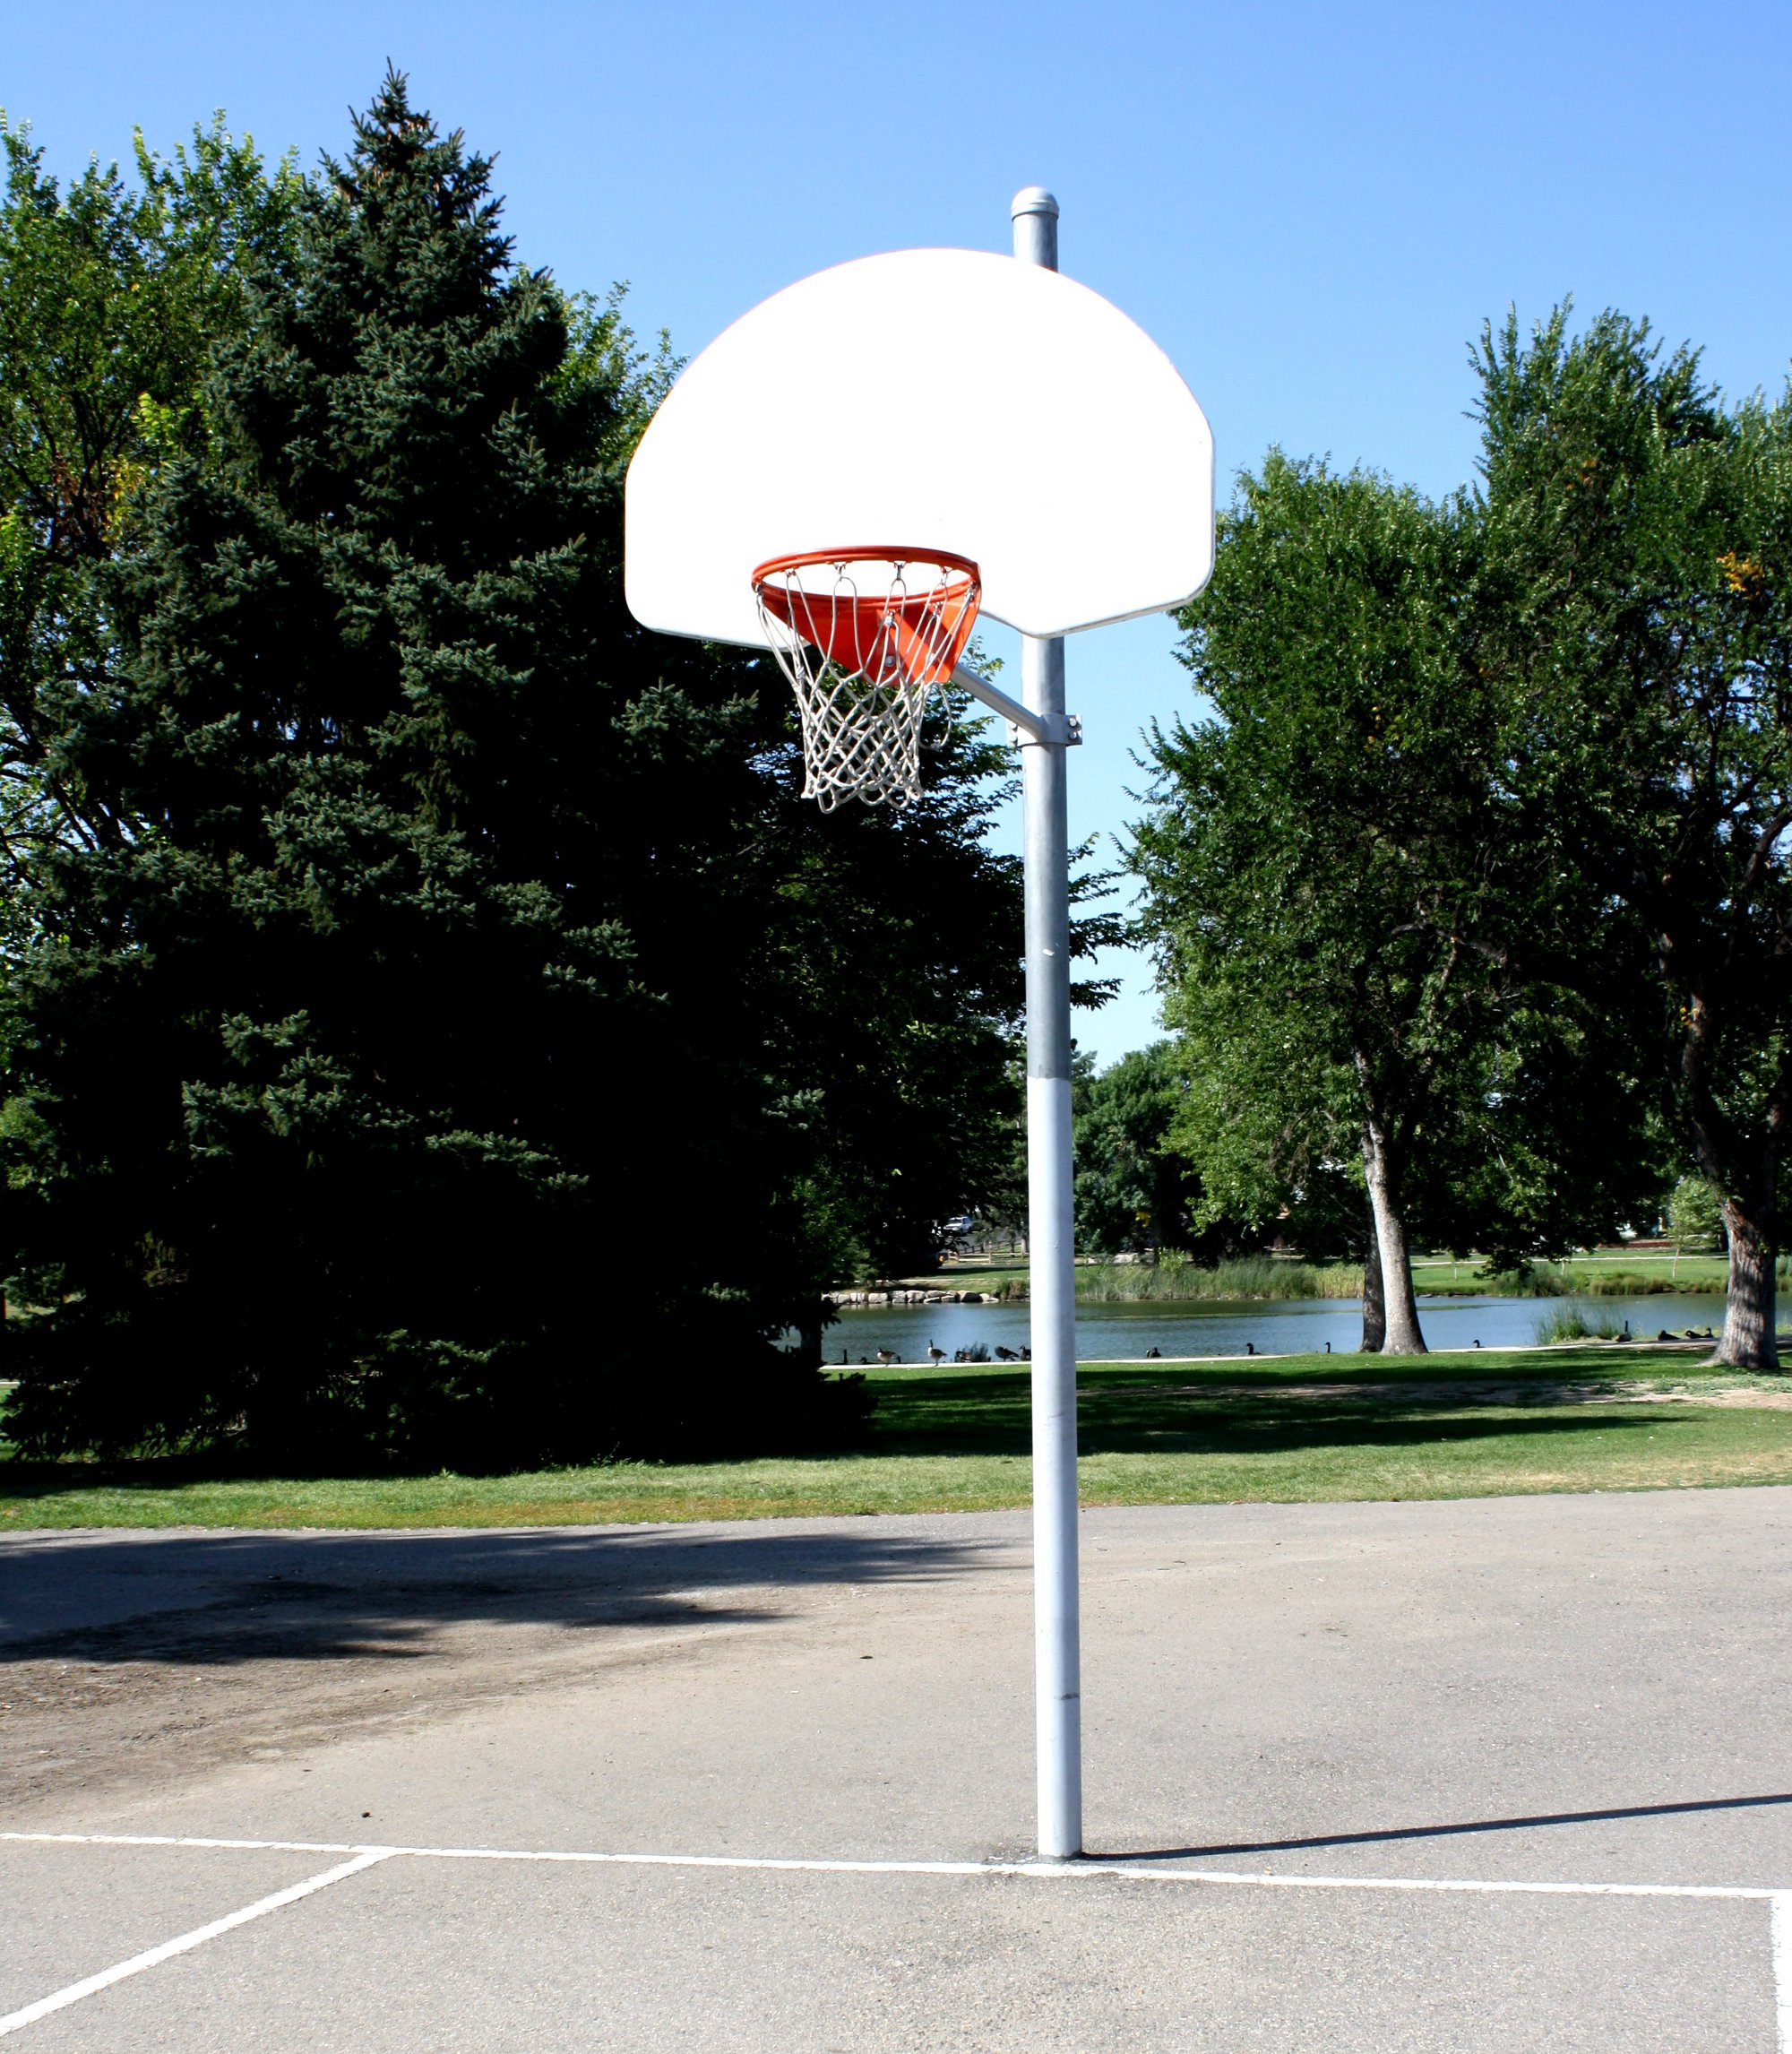 Basketball Hoop at the Park Picture | Free Photograph | Photos ...